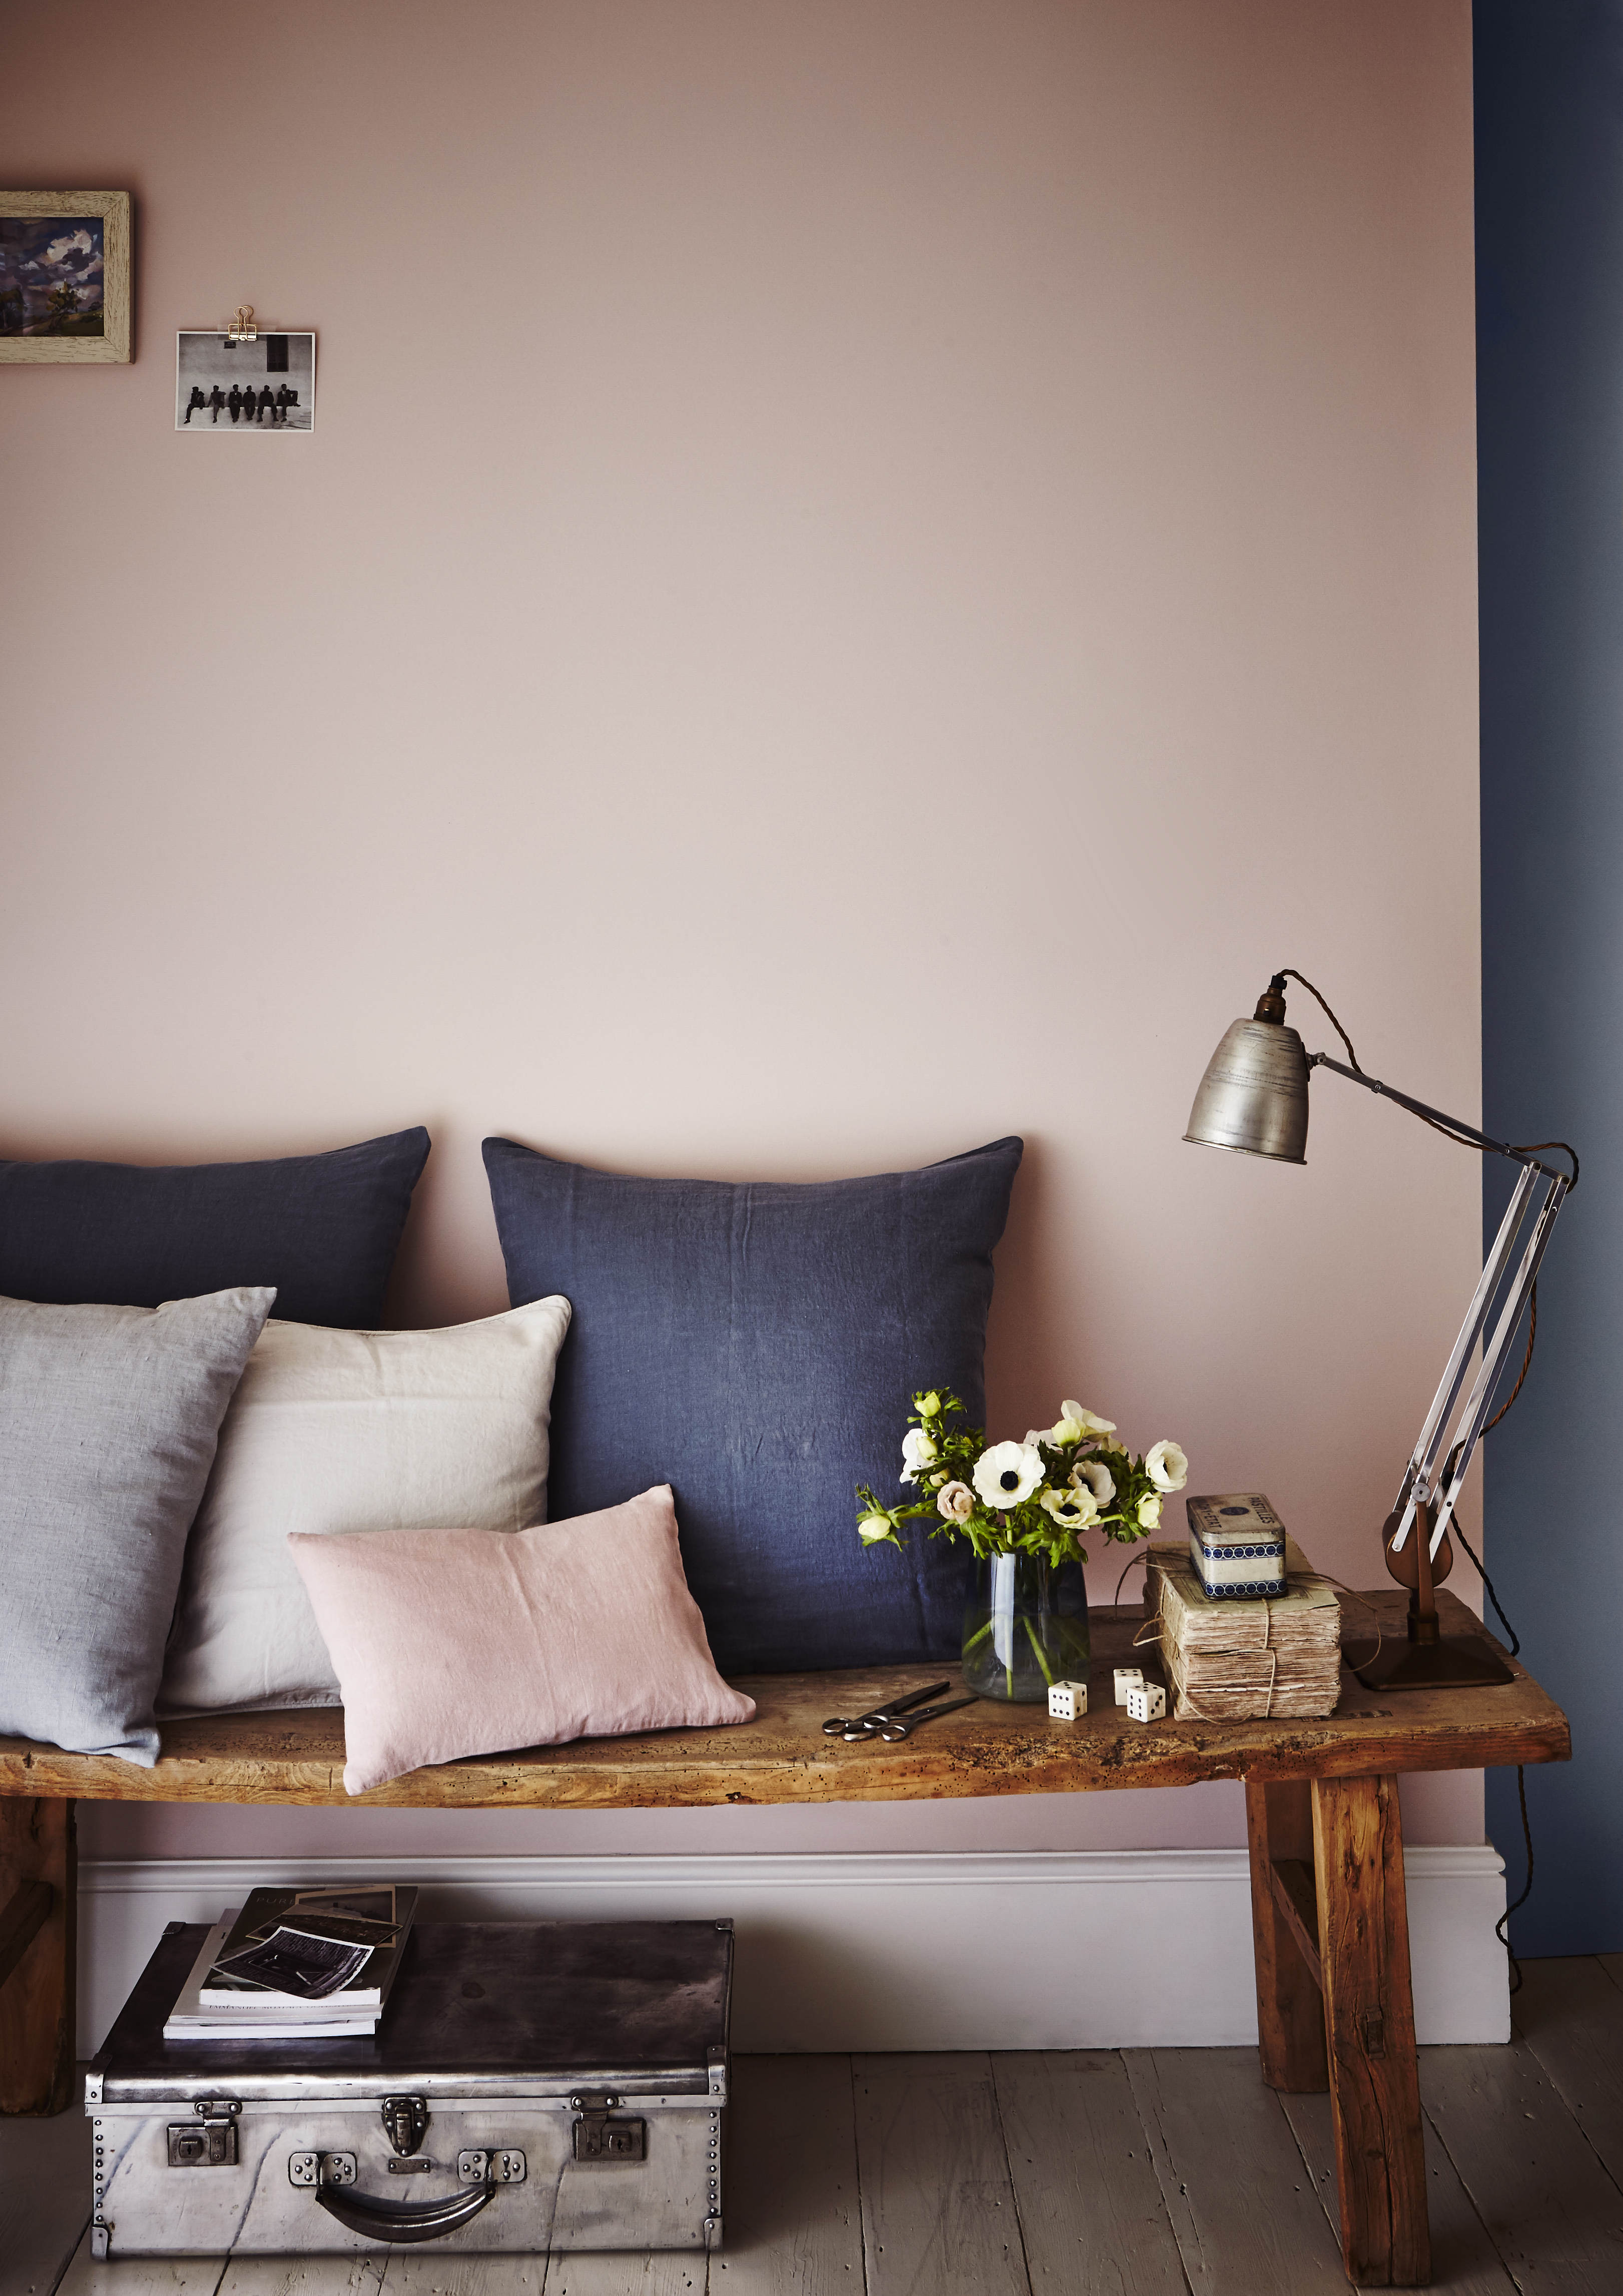 Hemsley new paint brand exclusively available at Homebase 